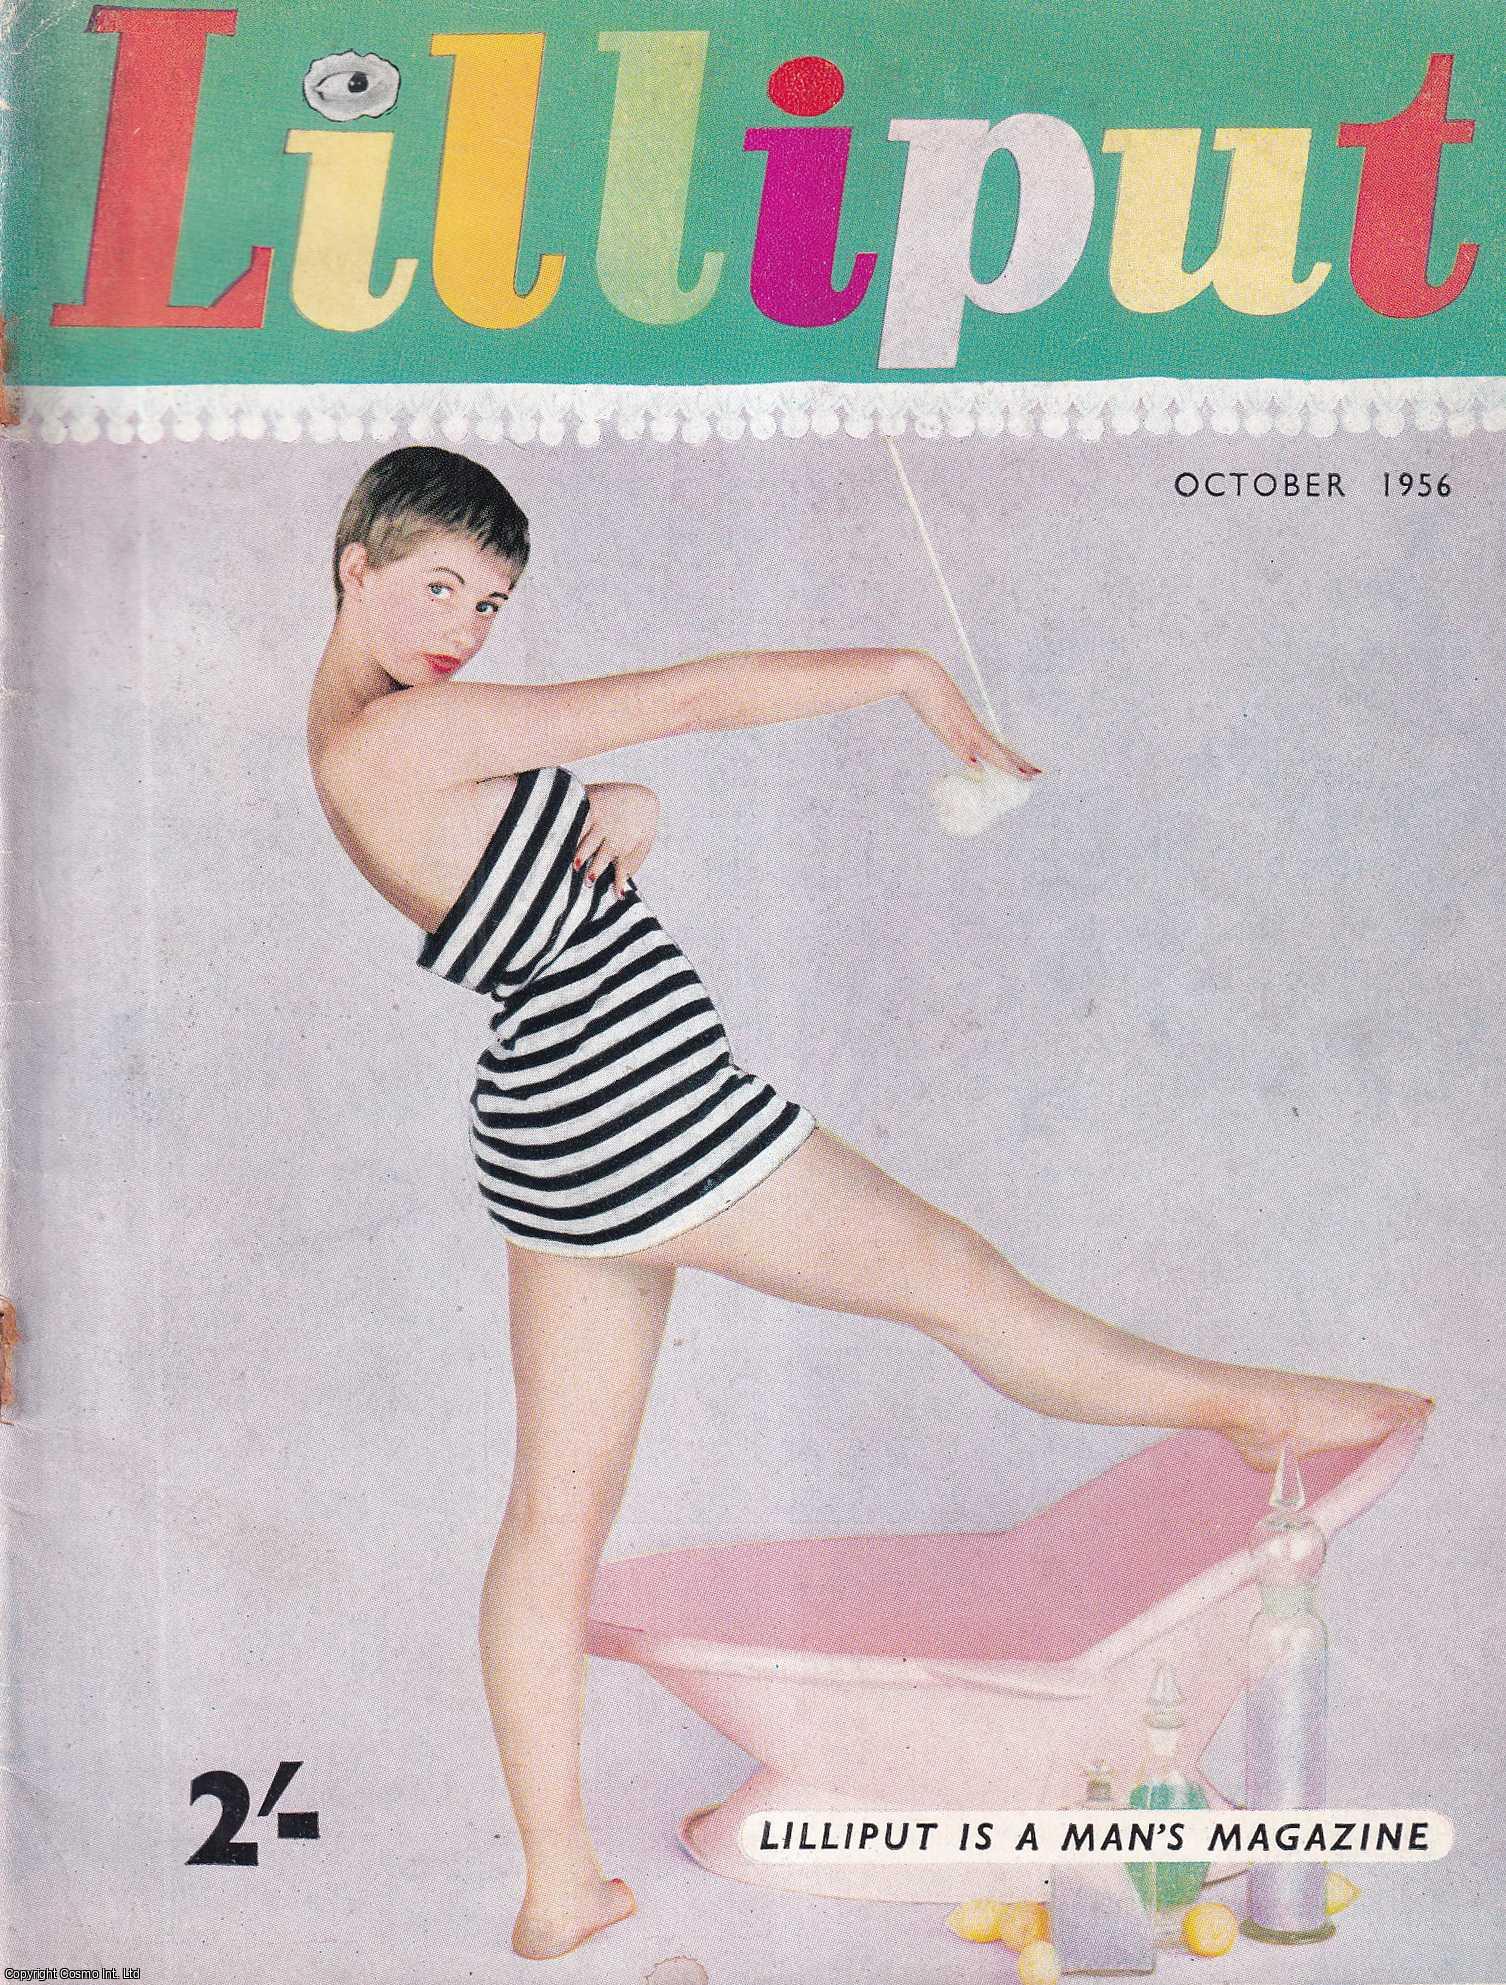 Lilliput - Lilliput Magazine. October 1956. Vol.39 no.4 Issue no.232. Robert Roslyn story, Judi Boutin photographs, Richard Bissell article, and other pieces.